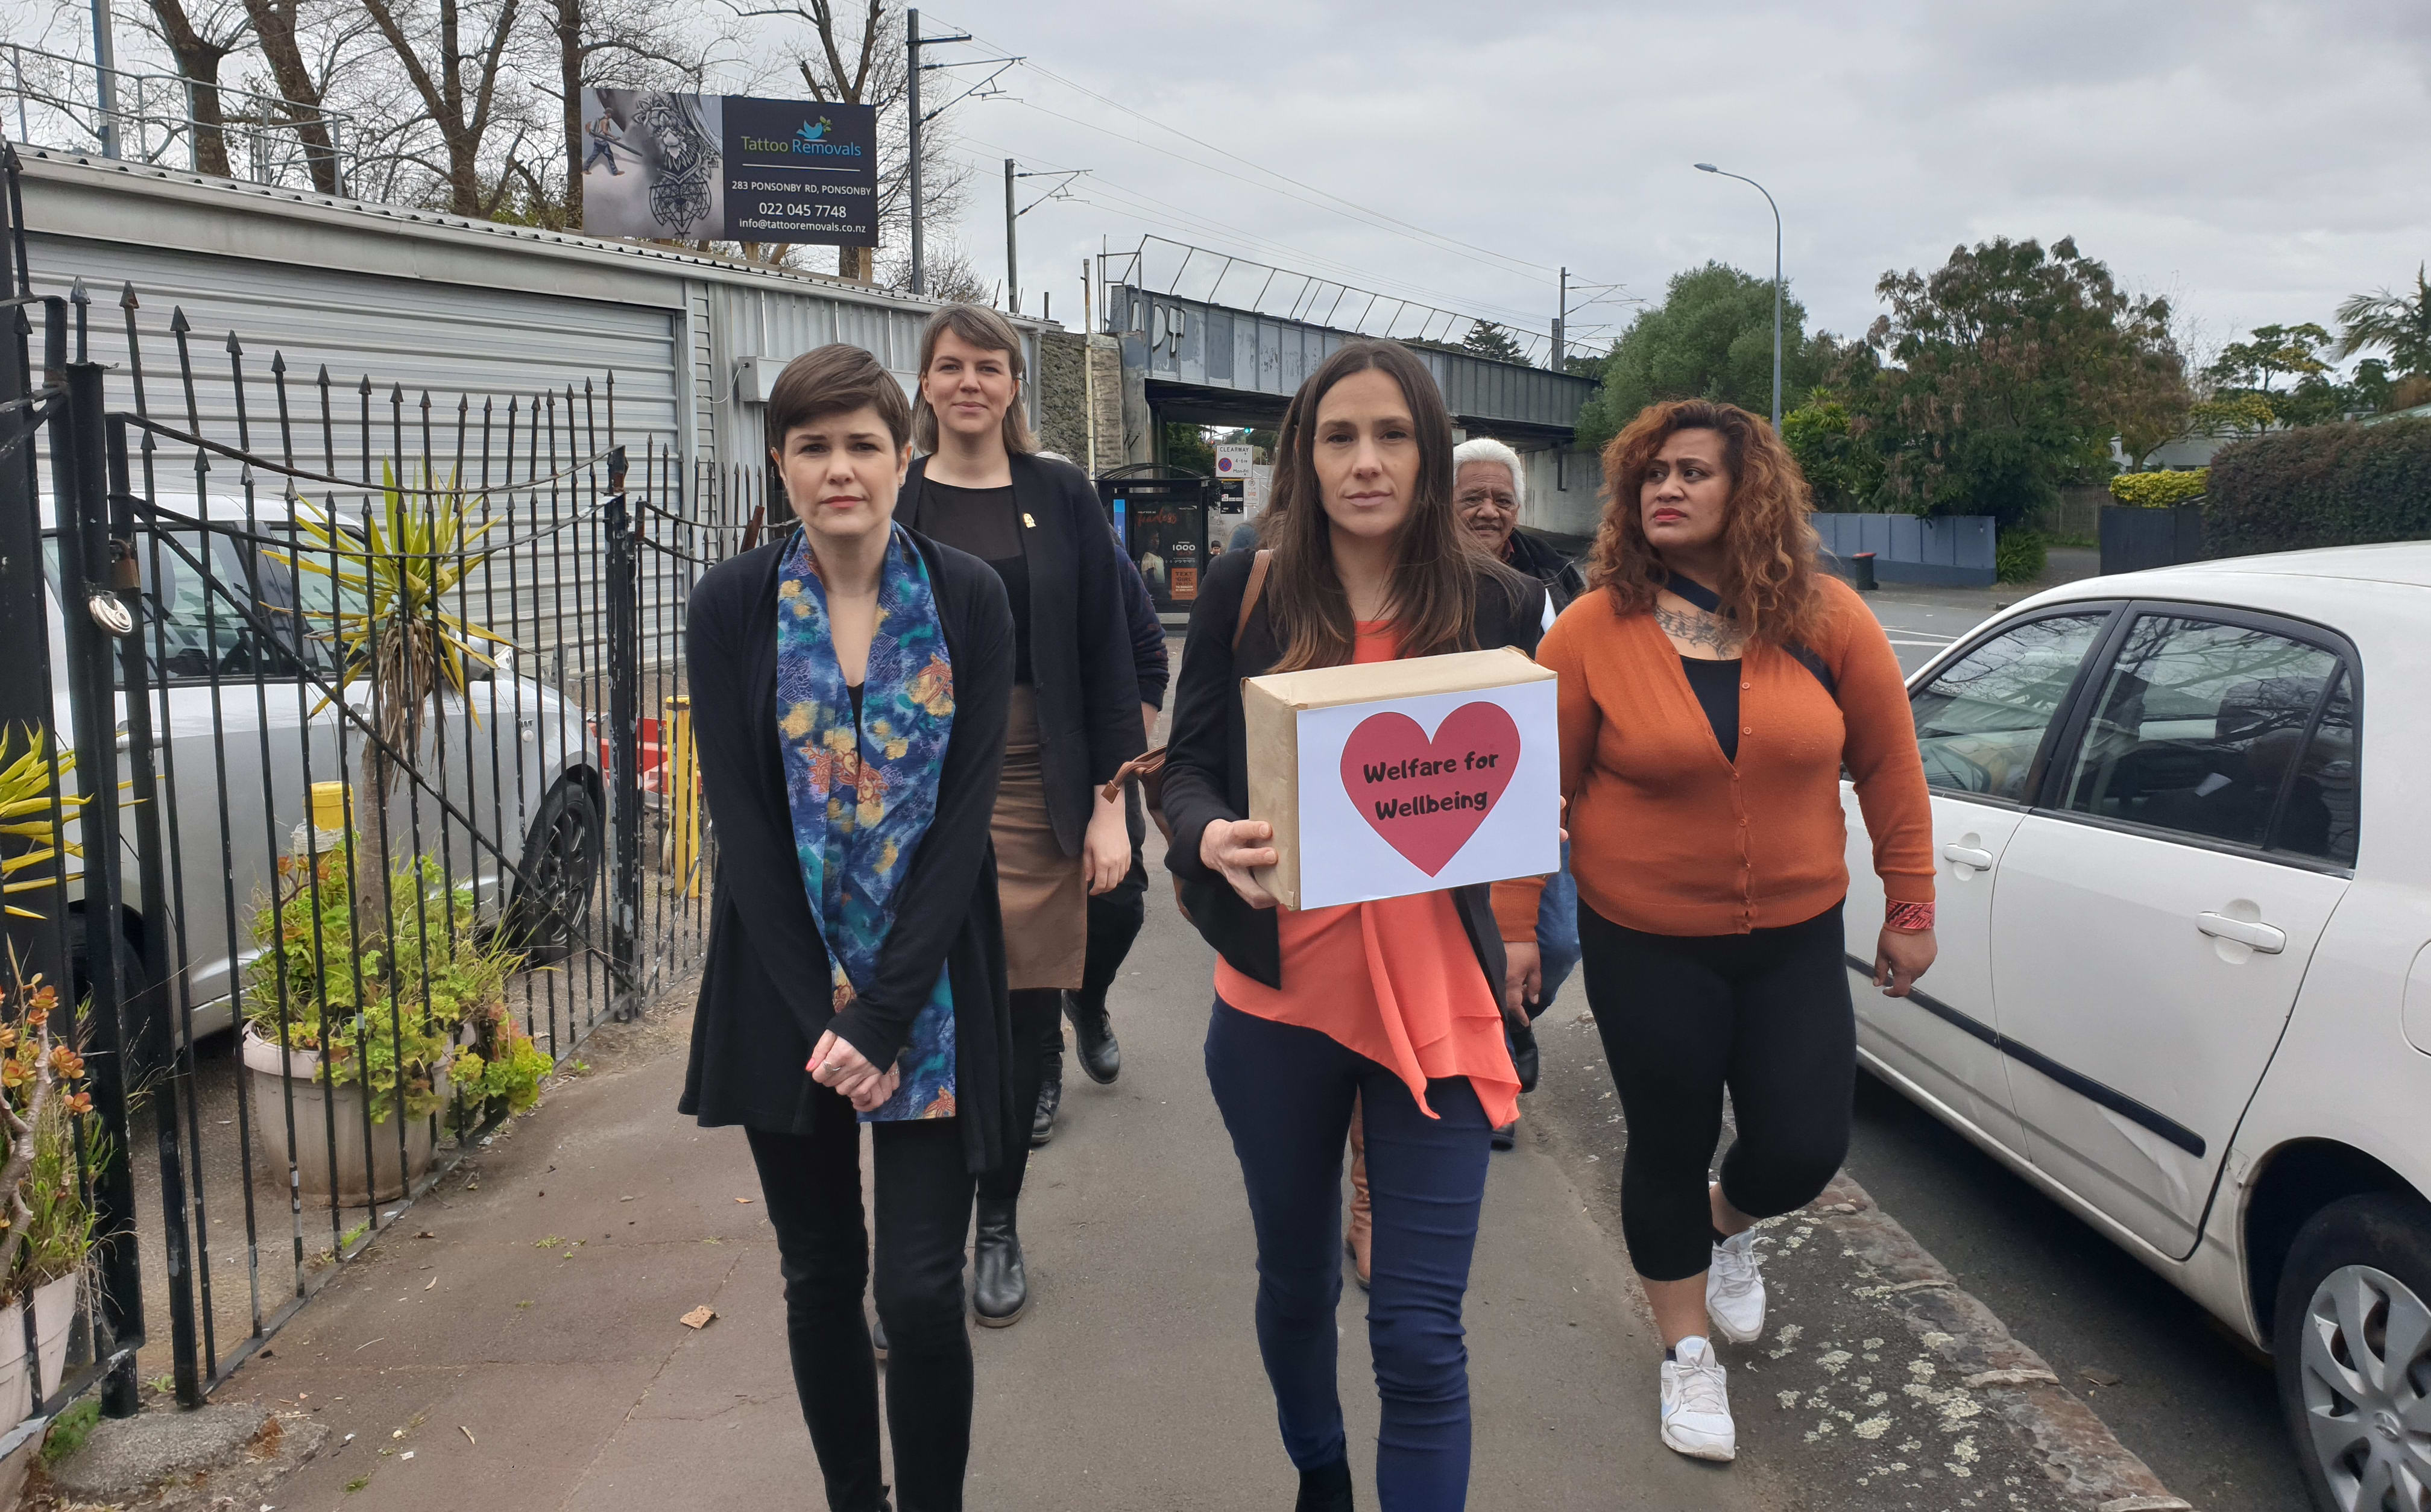 A petition calls for urgent changes to welfare system is delivered to Prime Minister Jacinda Ardern's electorate office in Auckland.